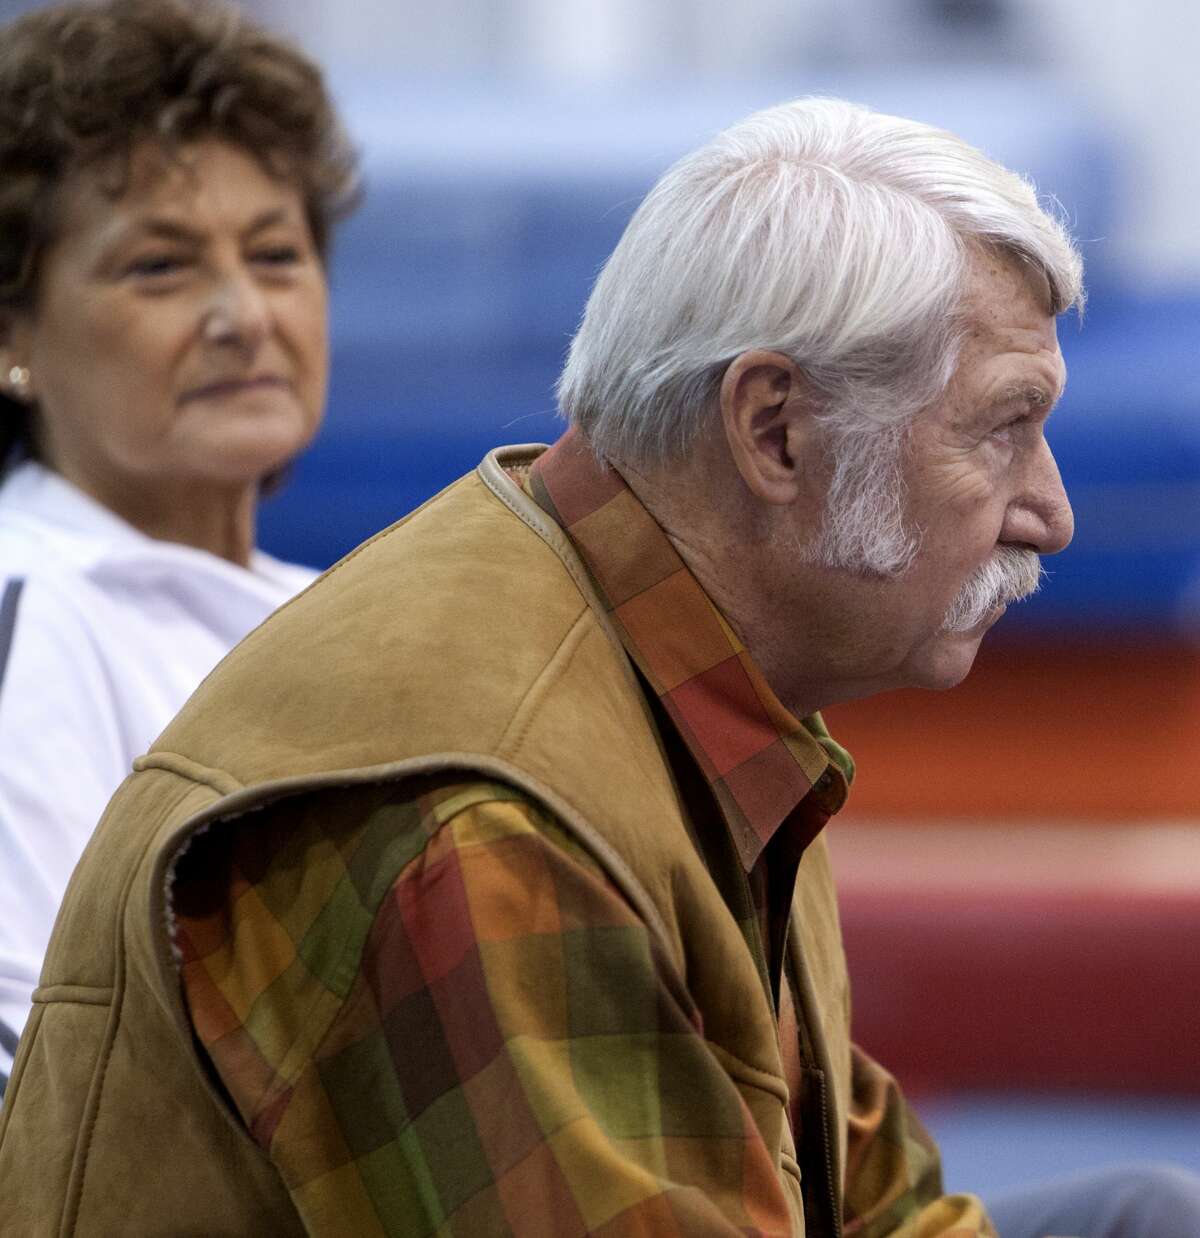 HUNTSVILLE, TX - JANUARY 26: Martha & Bela Karolyi watch from the side as their facility Karolyi Ranch was named an official training site for USA Gymnastics on January 26, 2011 in Huntsville, Texas. (Photo by Bob Levey/Getty Images for Hilton)